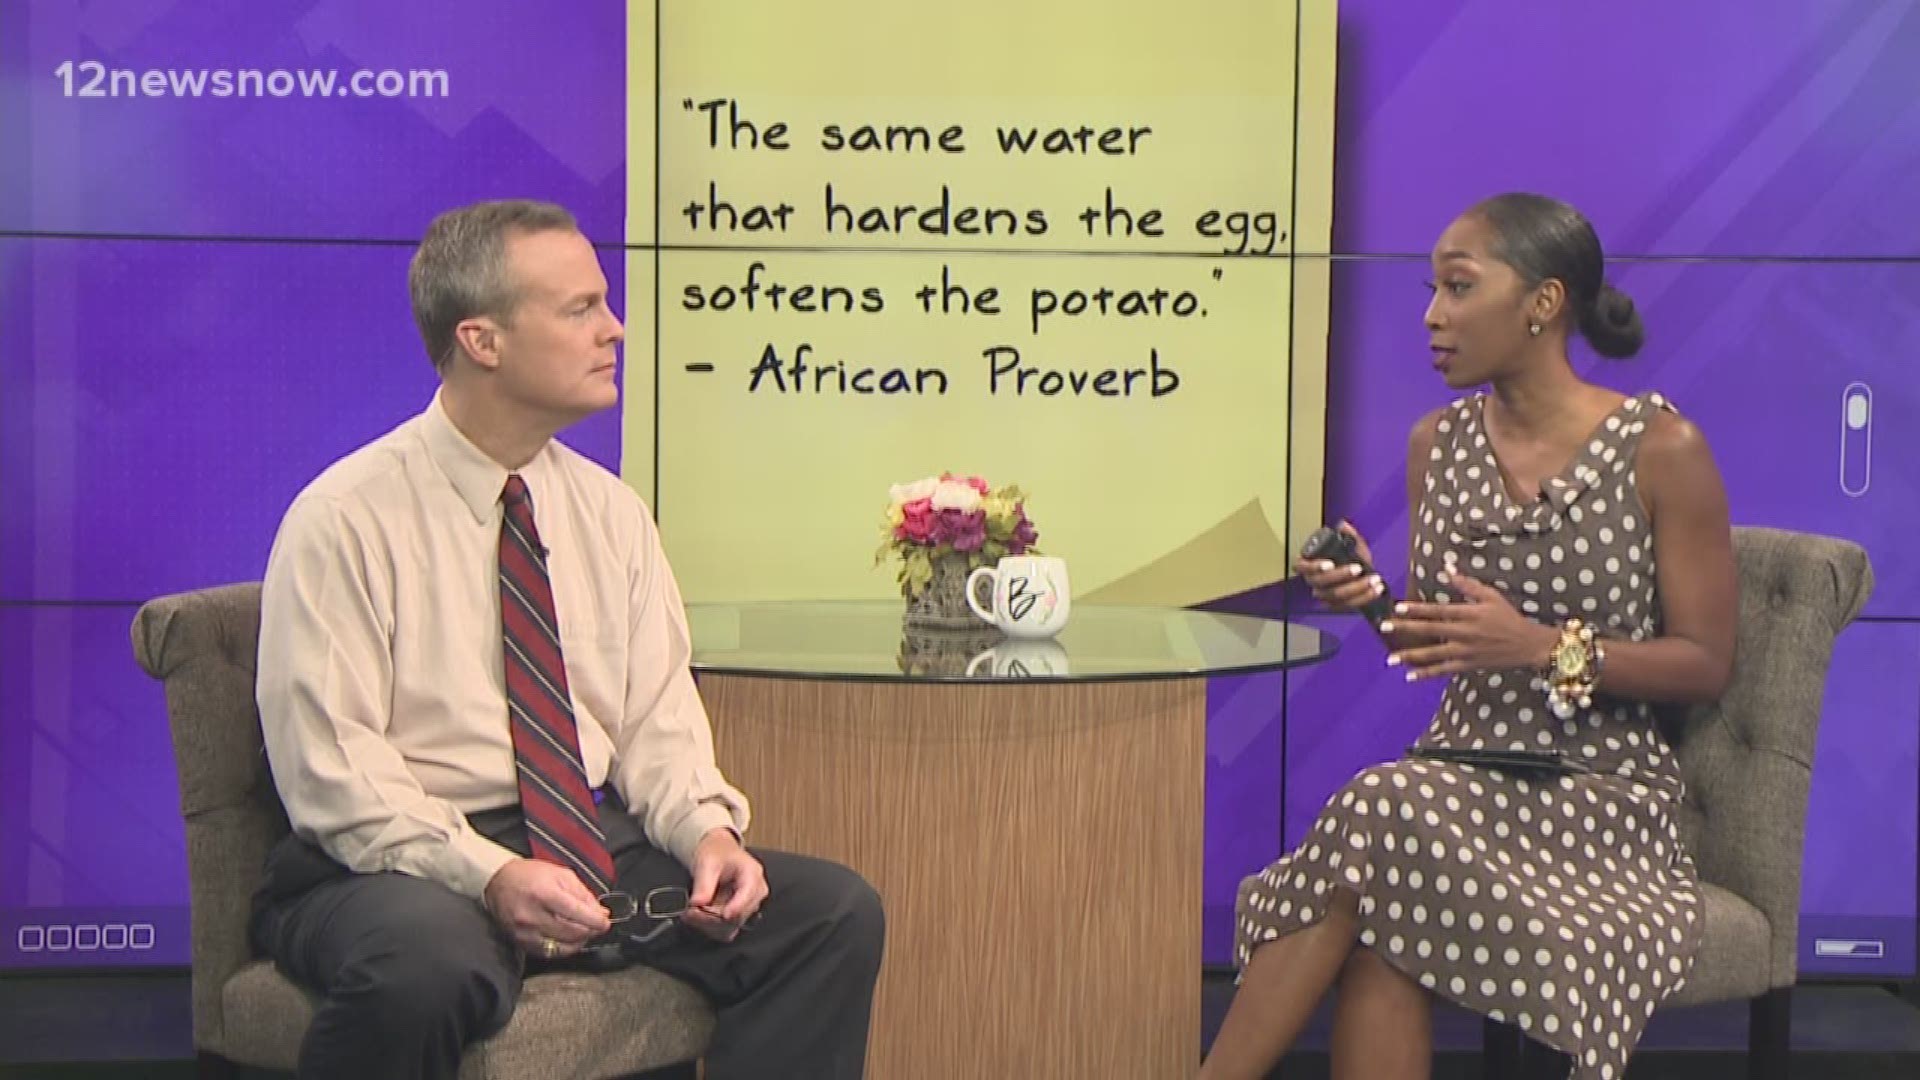 The same water that hardens the egg, softens in potato.- African Proverb